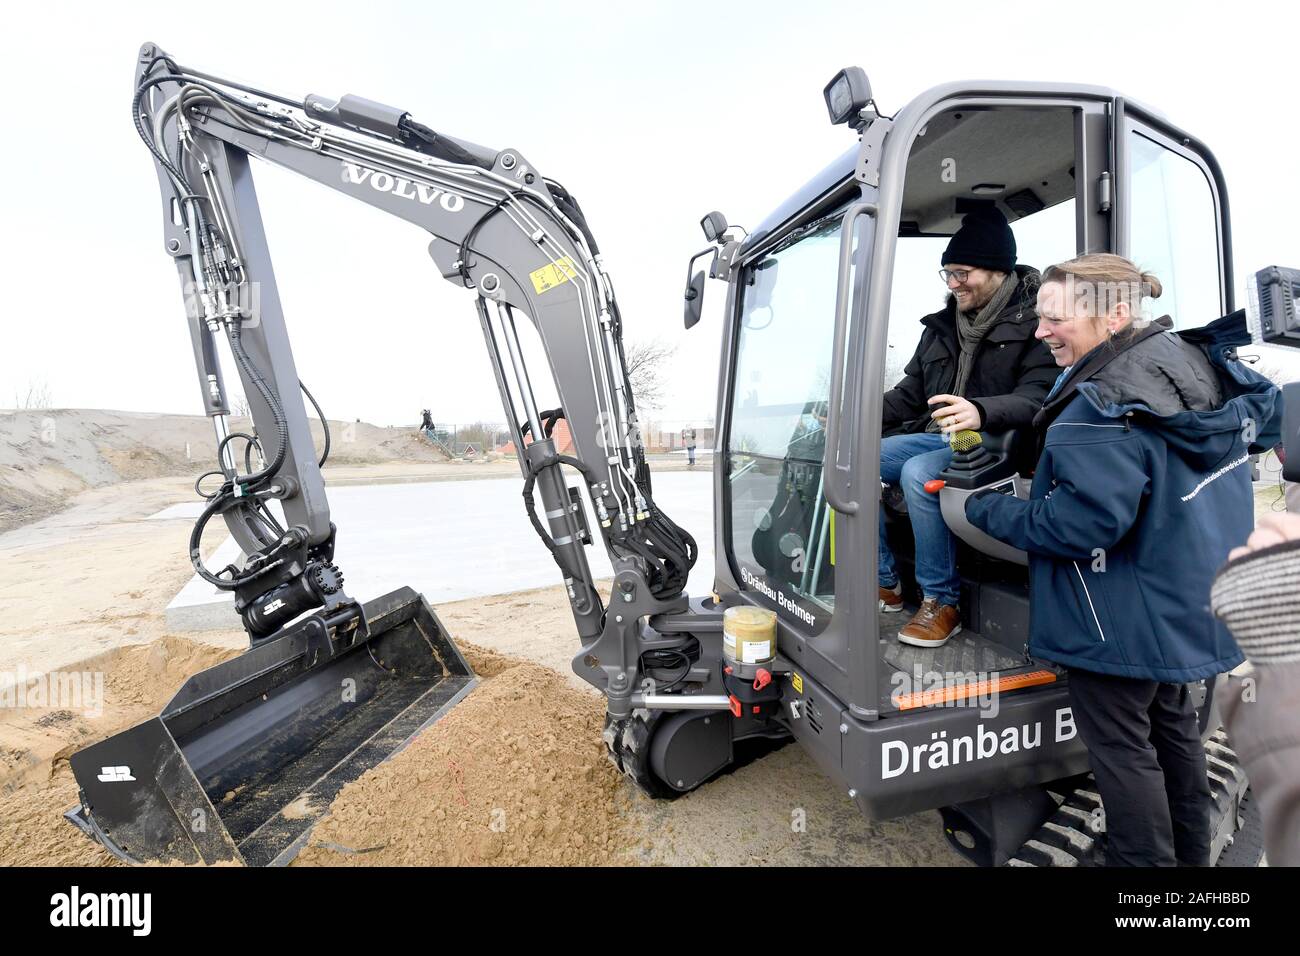 Friedrichskoog, Germany. 16th Dec, 2019. Jan Philipp Albrecht (Bündnis90/Die Grünen), Schleswig-Holstein Minister for Energy Turnaround, Agriculture, Environment, Nature and Digitisation and Tanja Rosenberger, Head of the seal station, stand at the laying of the foundation stone for the extension and reconstruction of the seal station on an excavator. In addition to a new entrance building and exterior modernizations, a new exhibition building with a seal observation room is planned. Credit: Carsten Rehder/dpa/Alamy Live News Stock Photo